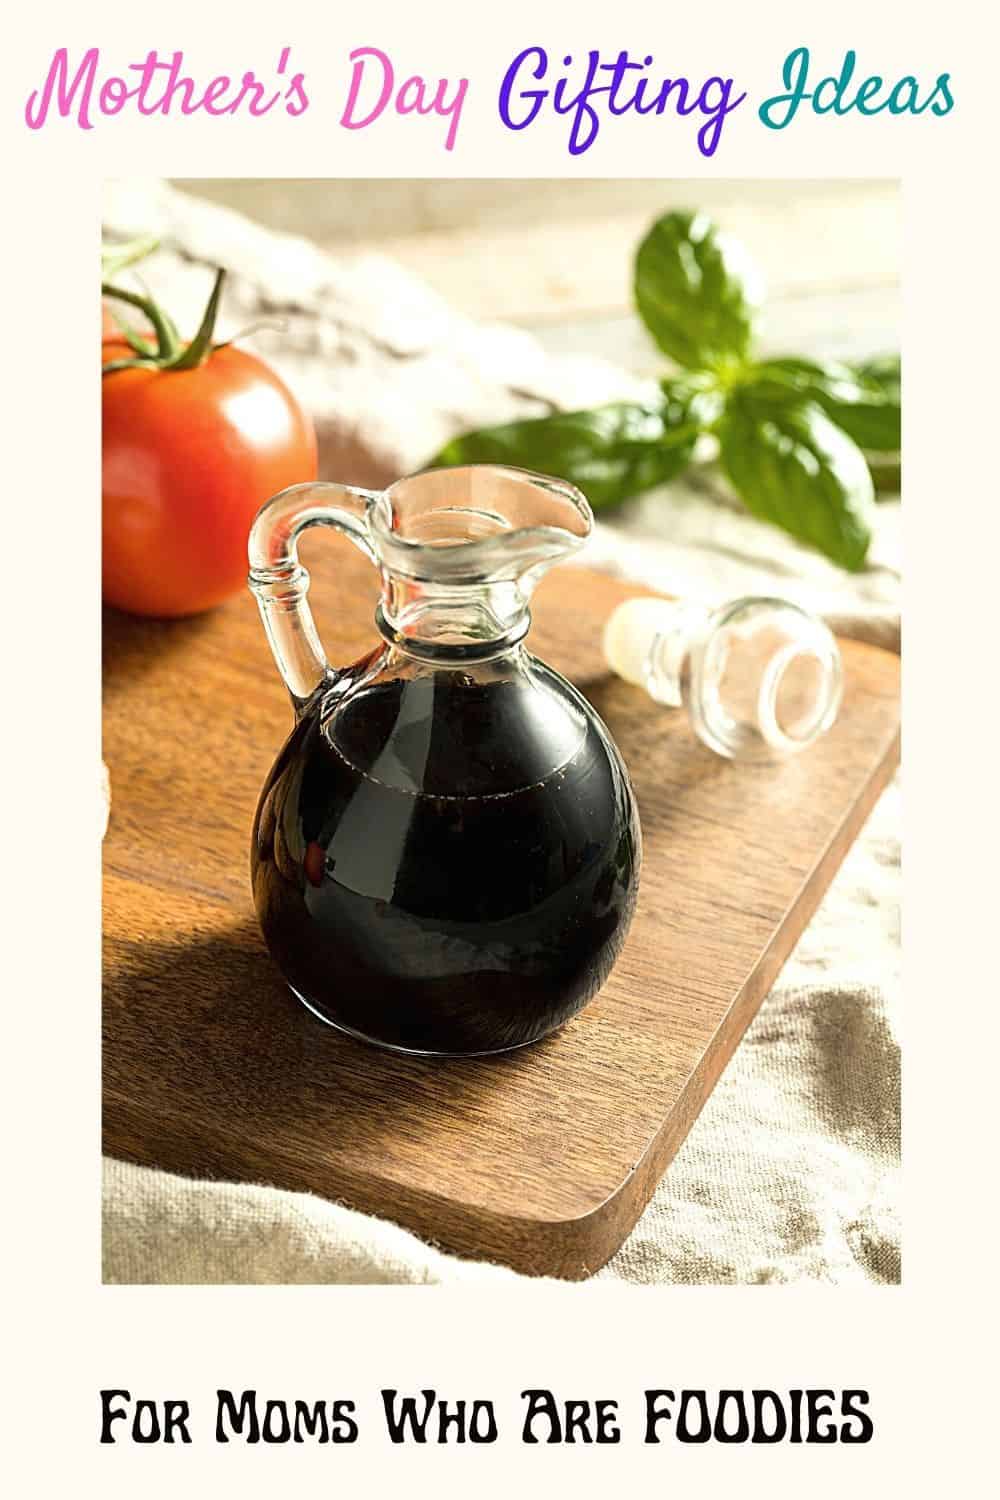 Moms who are foodies Balsamic Vinegar Gift Sets